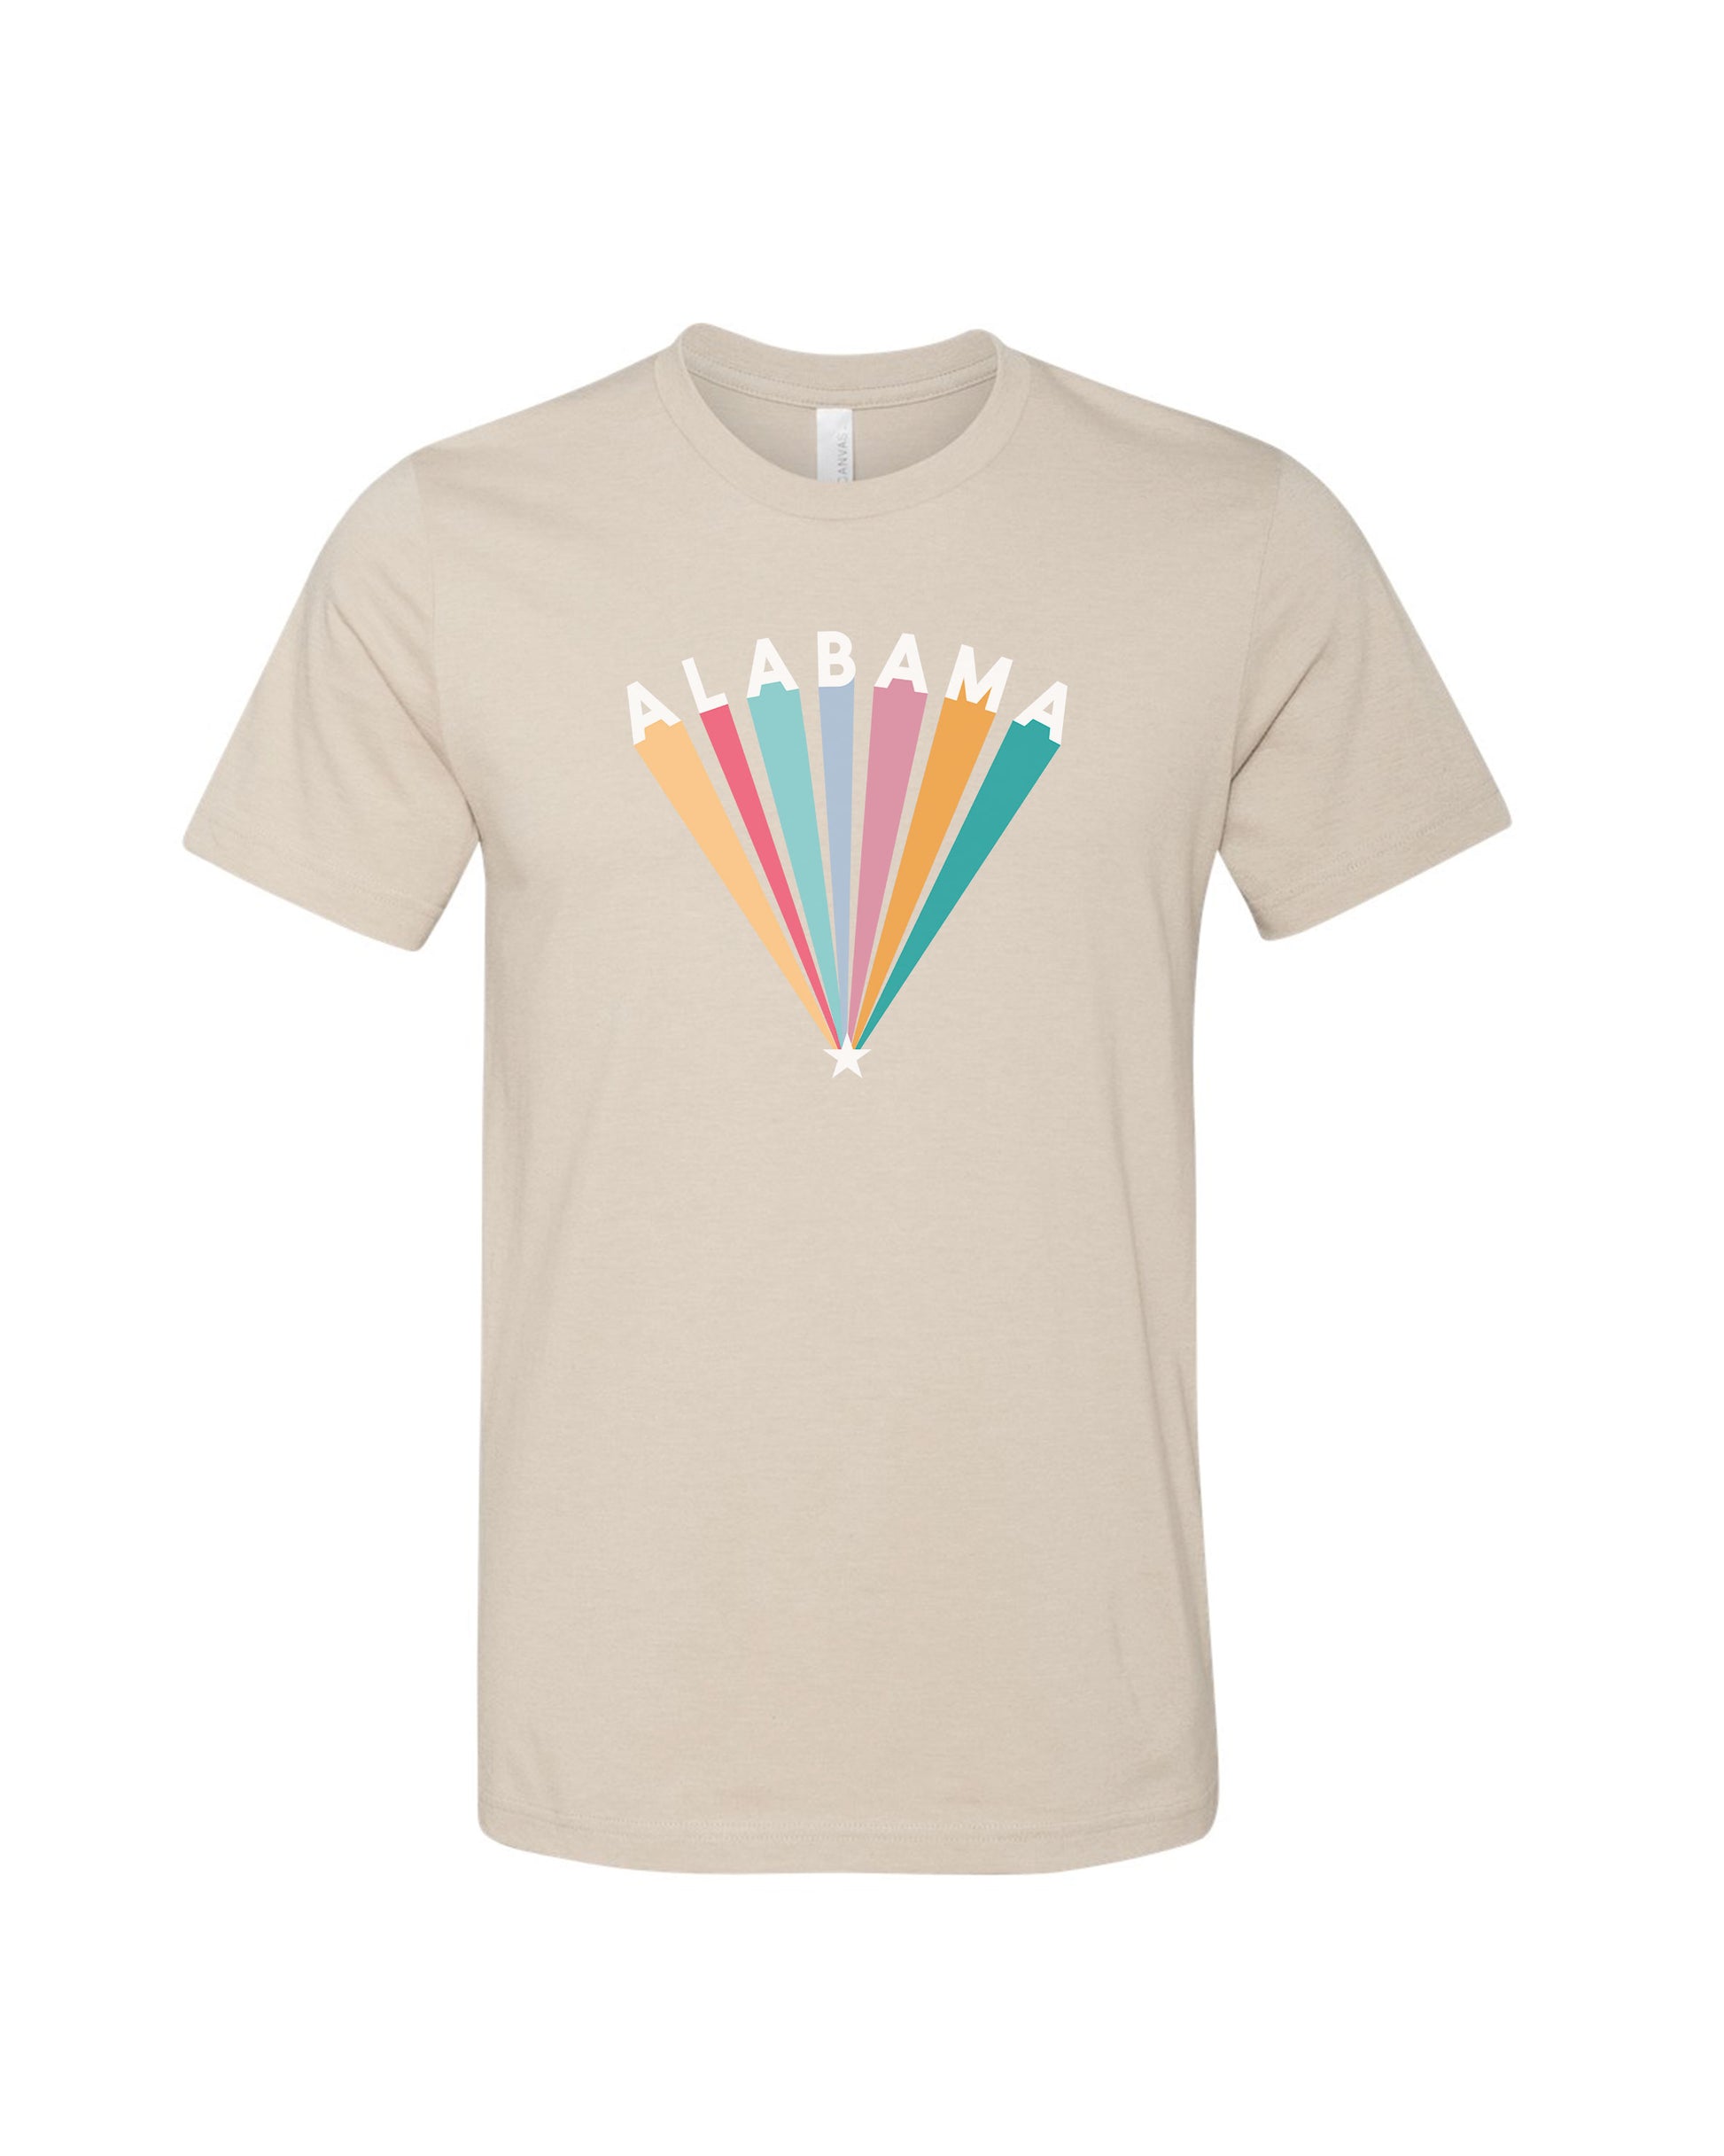 Multi Color Perspective | Tee | Kids-Sister Shirts-Sister Shirts, Cute & Custom Tees for Mama & Littles in Trussville, Alabama.